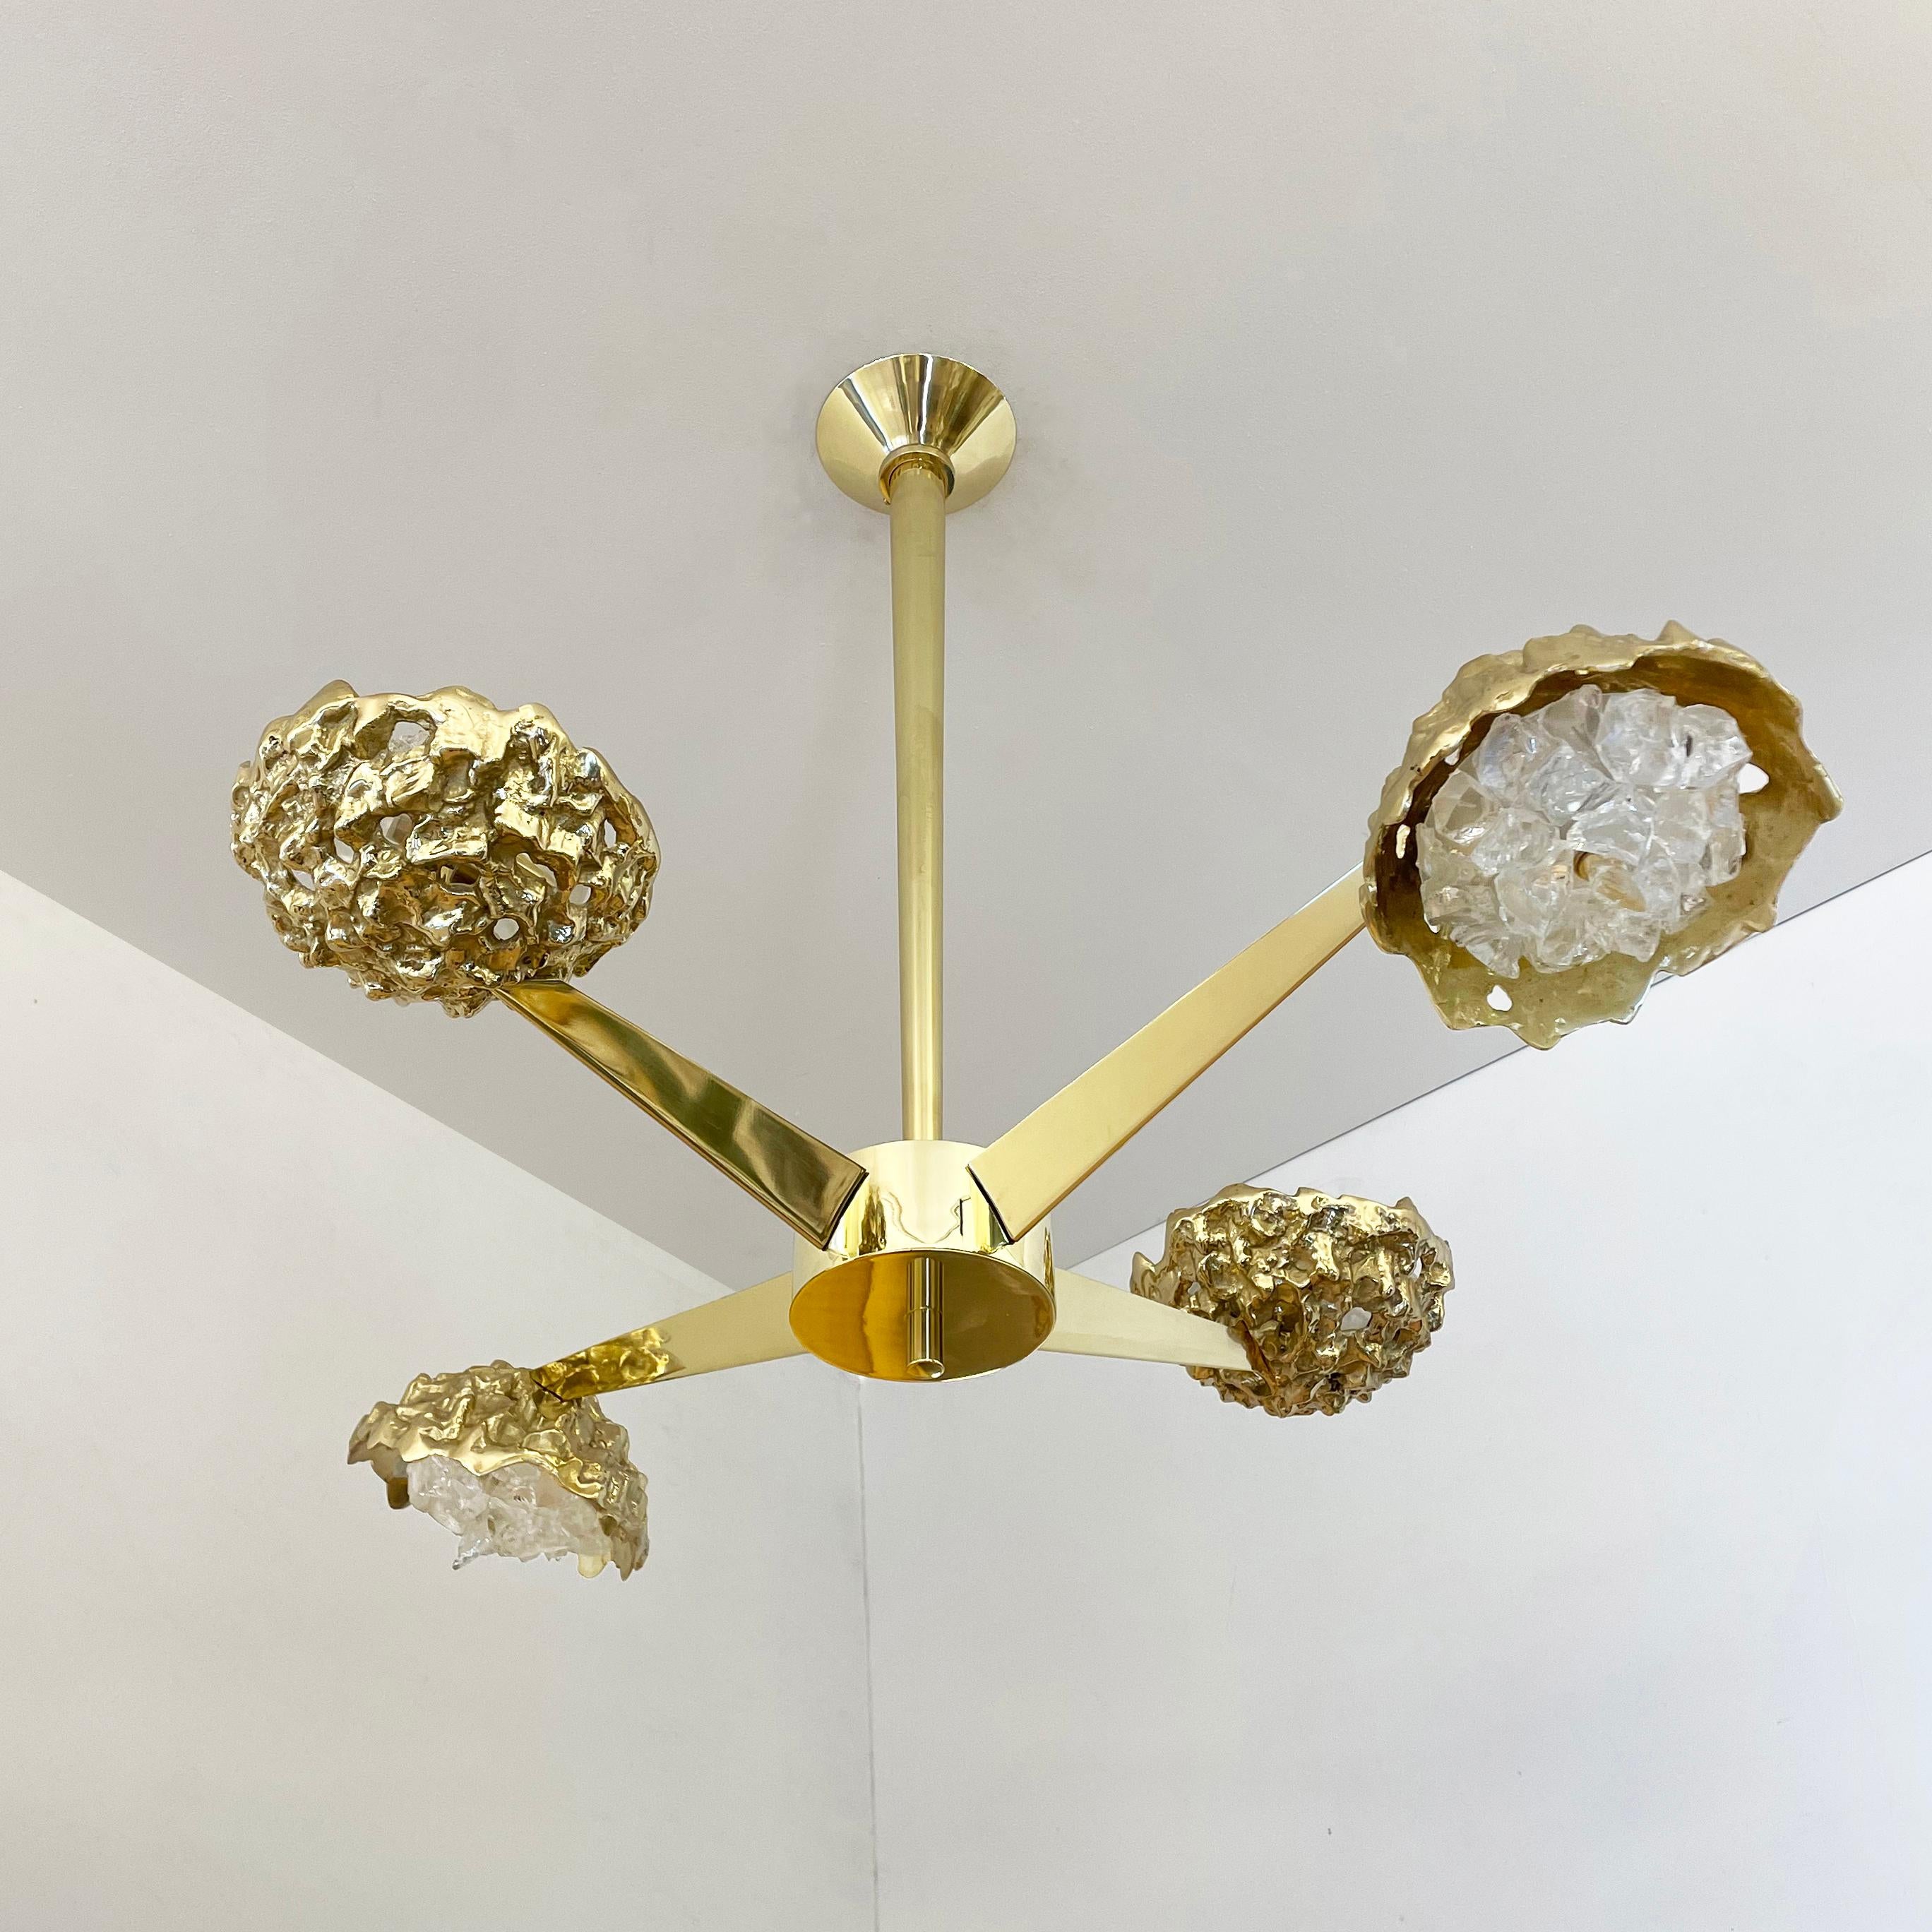 The Fusione N.4 ceiling fixture highlights the contrast between organic forms and sleek geometric lines; Cast brass shades with irregular glass crystals sprout from polished V shaped arms. Shown in polished brass with clear glass. See the Fusione